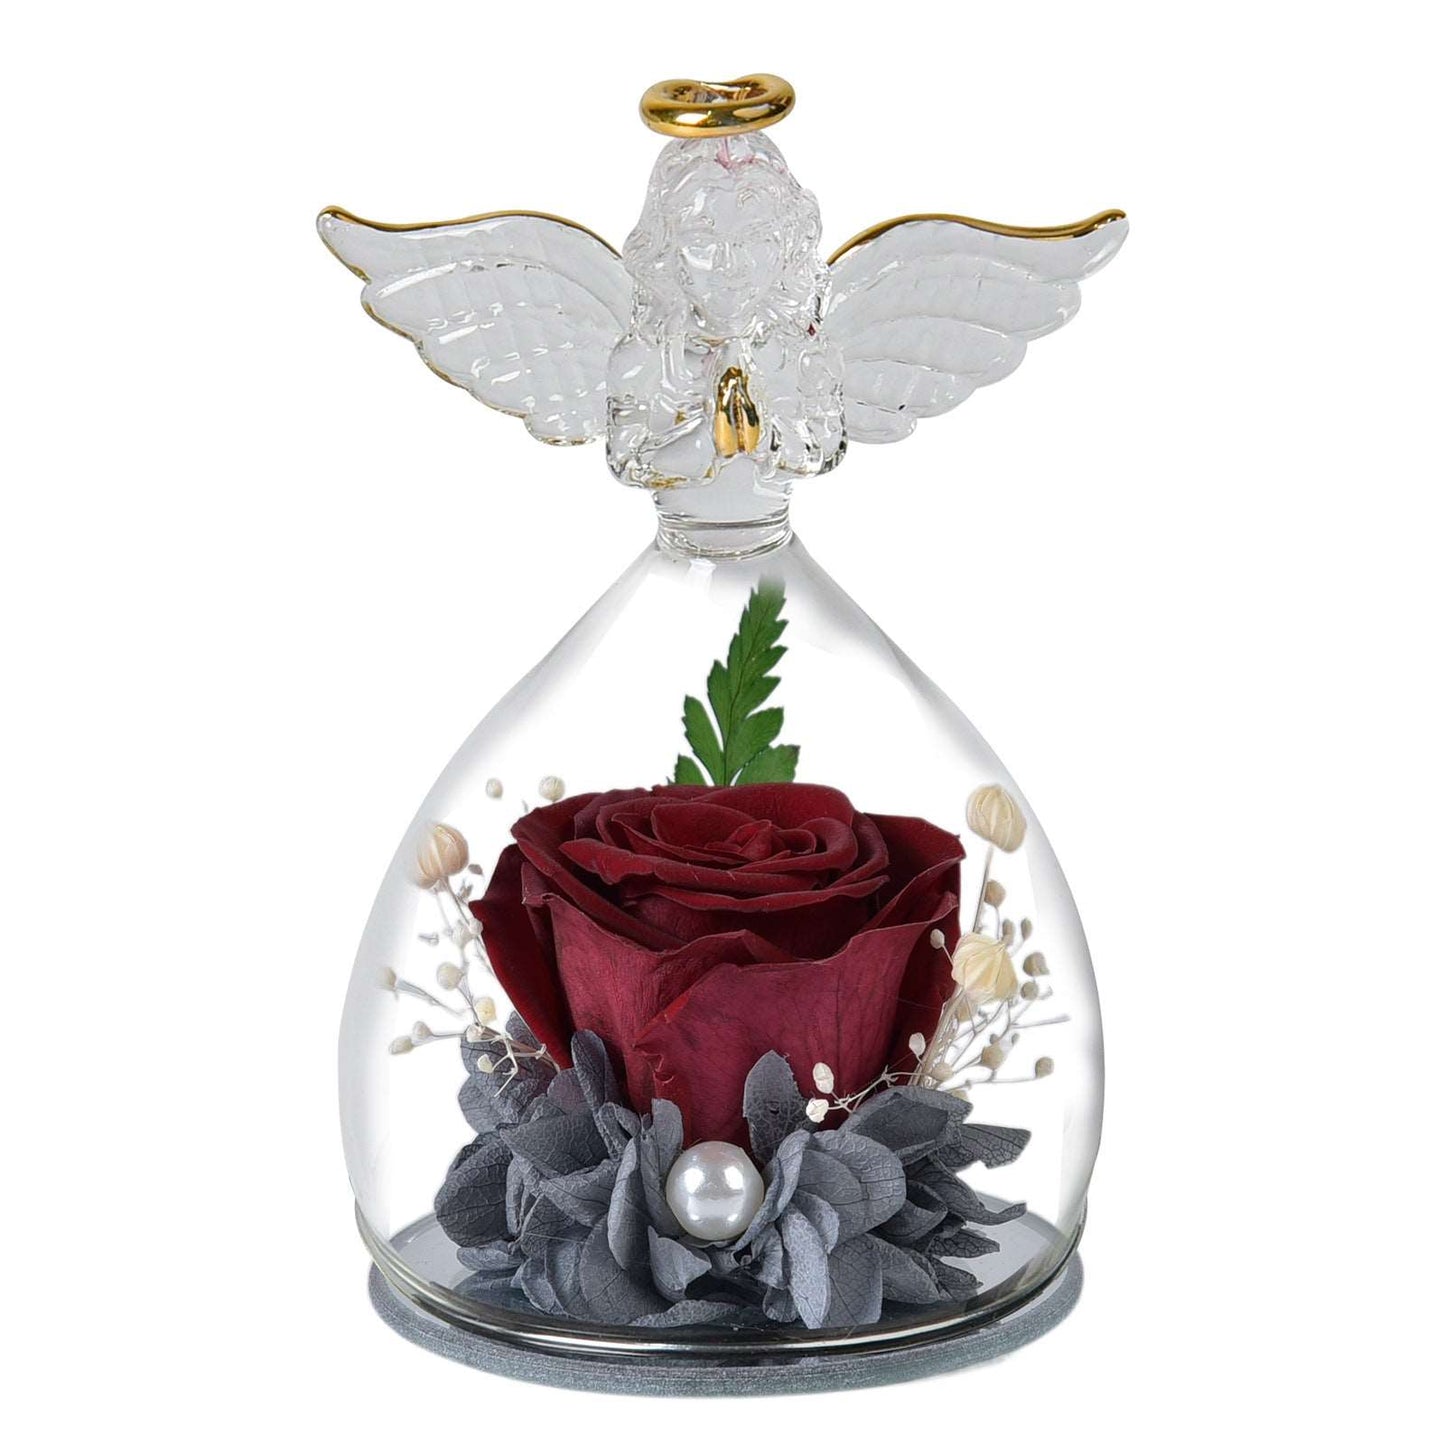 "Eternal Flower Rose Glass Cover - Perfect Christmas, Valentine's Day Decoration - Angel-Inspired Design - Bestselling Item on Amazon"